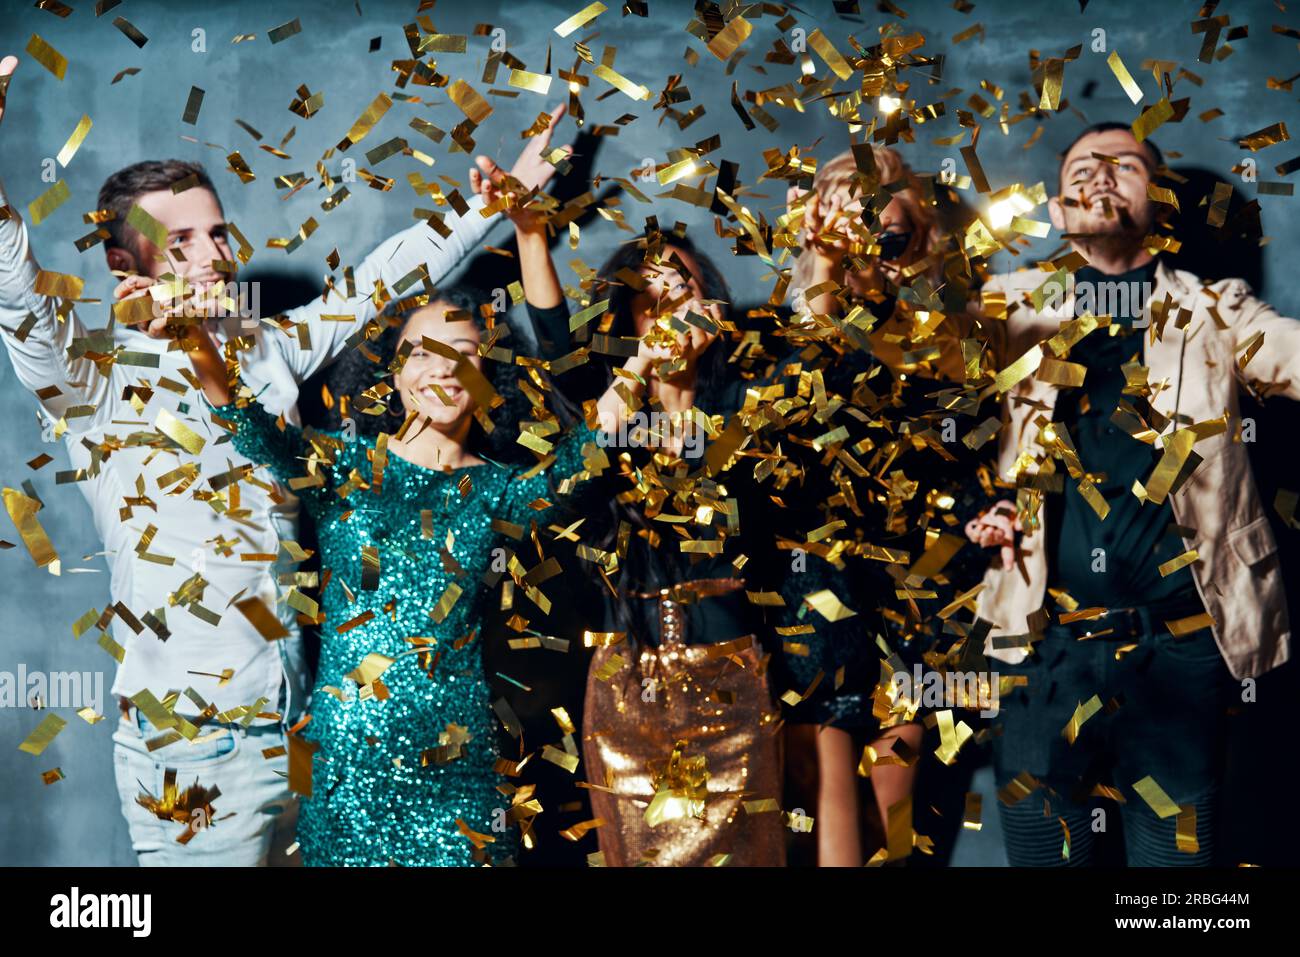 Group of friends enjoying party and throwing confetti. Celebration concept Stock Photo